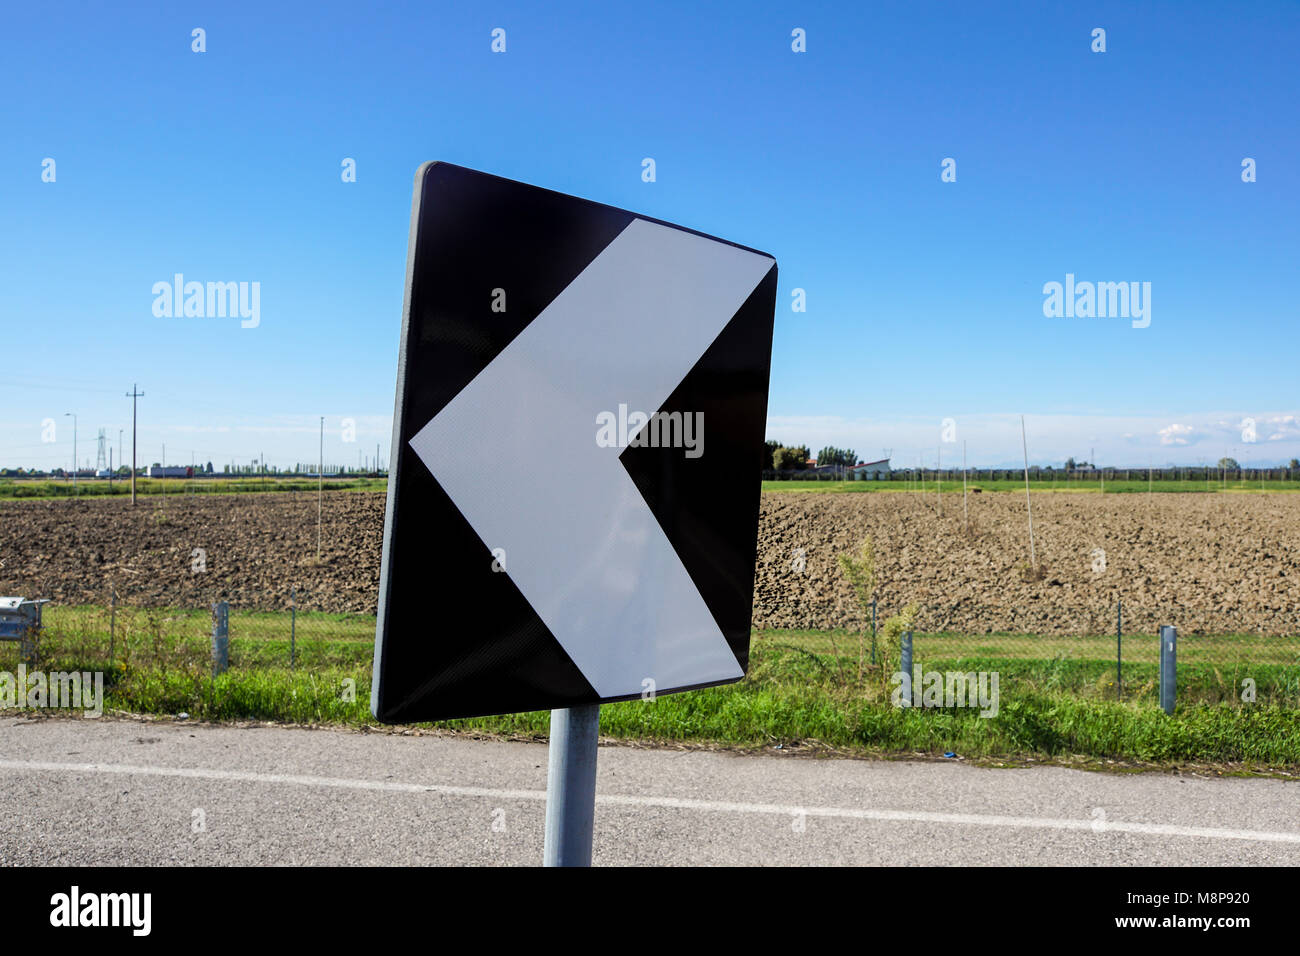 road signs indicating direction on curved road Stock Photo